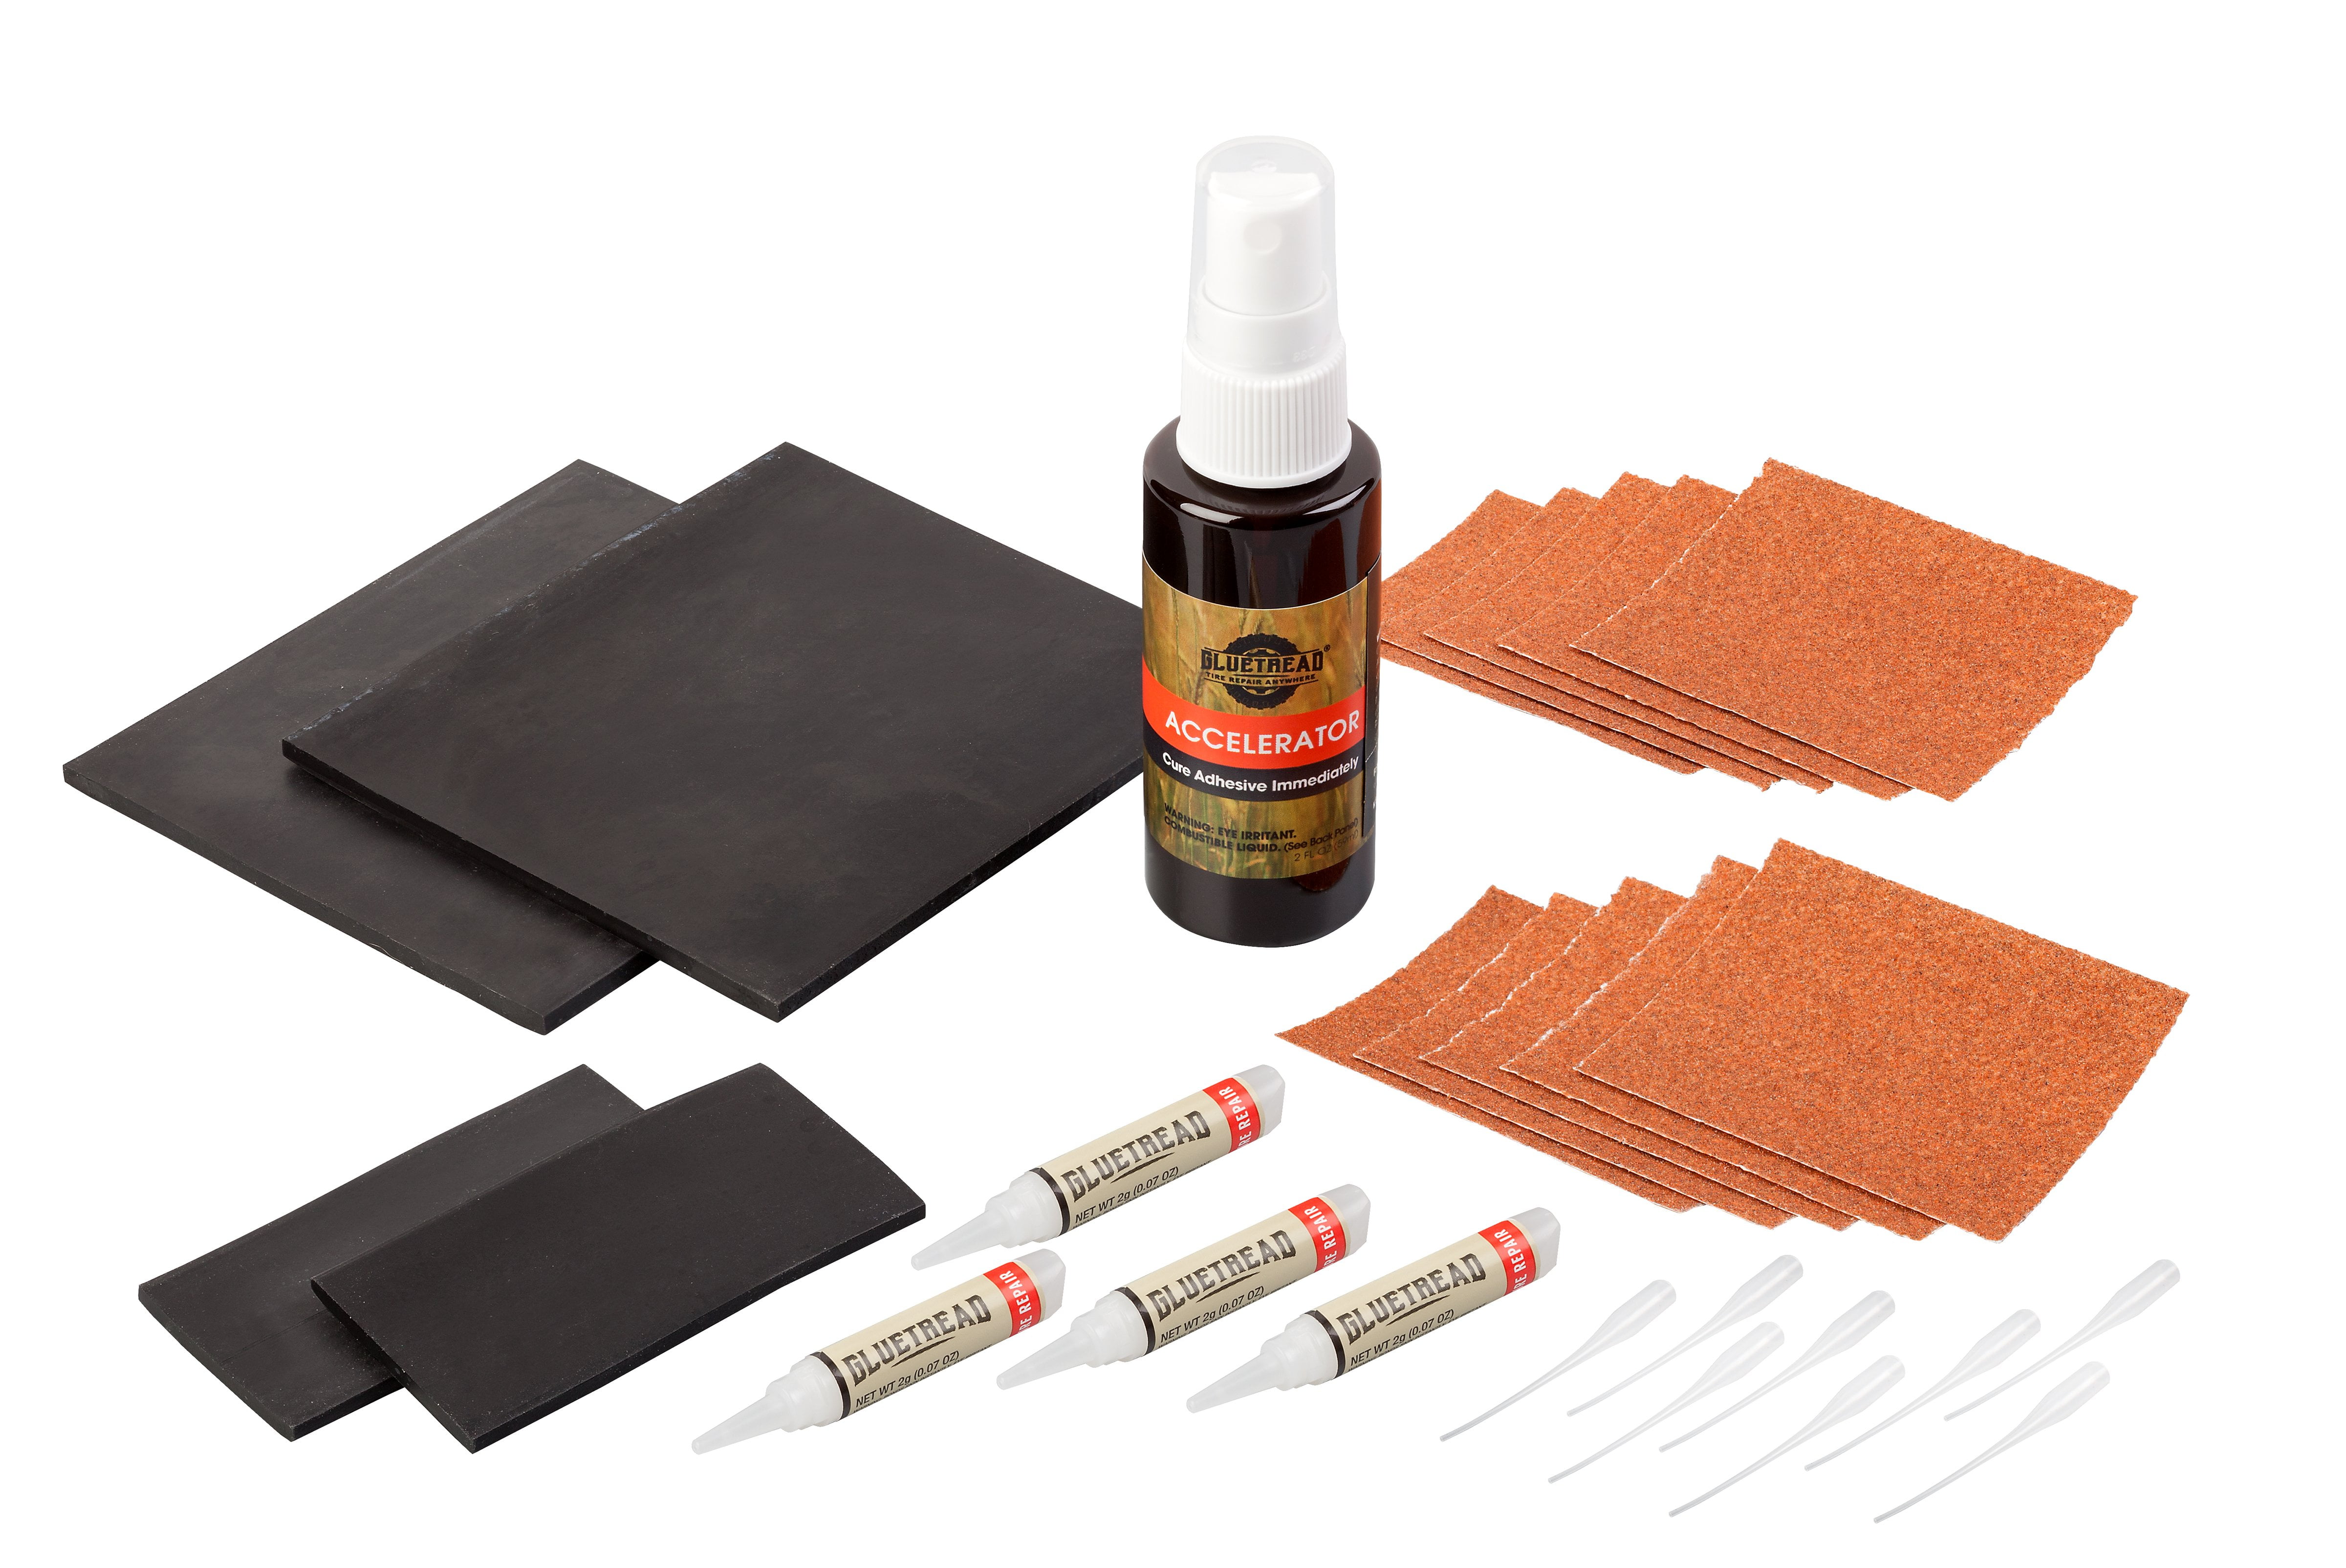 Glue Tread Off-road External Sidewall Puncture Repair Kit with Accelerator  and Emergency Inflation Kit Combo - Allen's Trading Company LLC